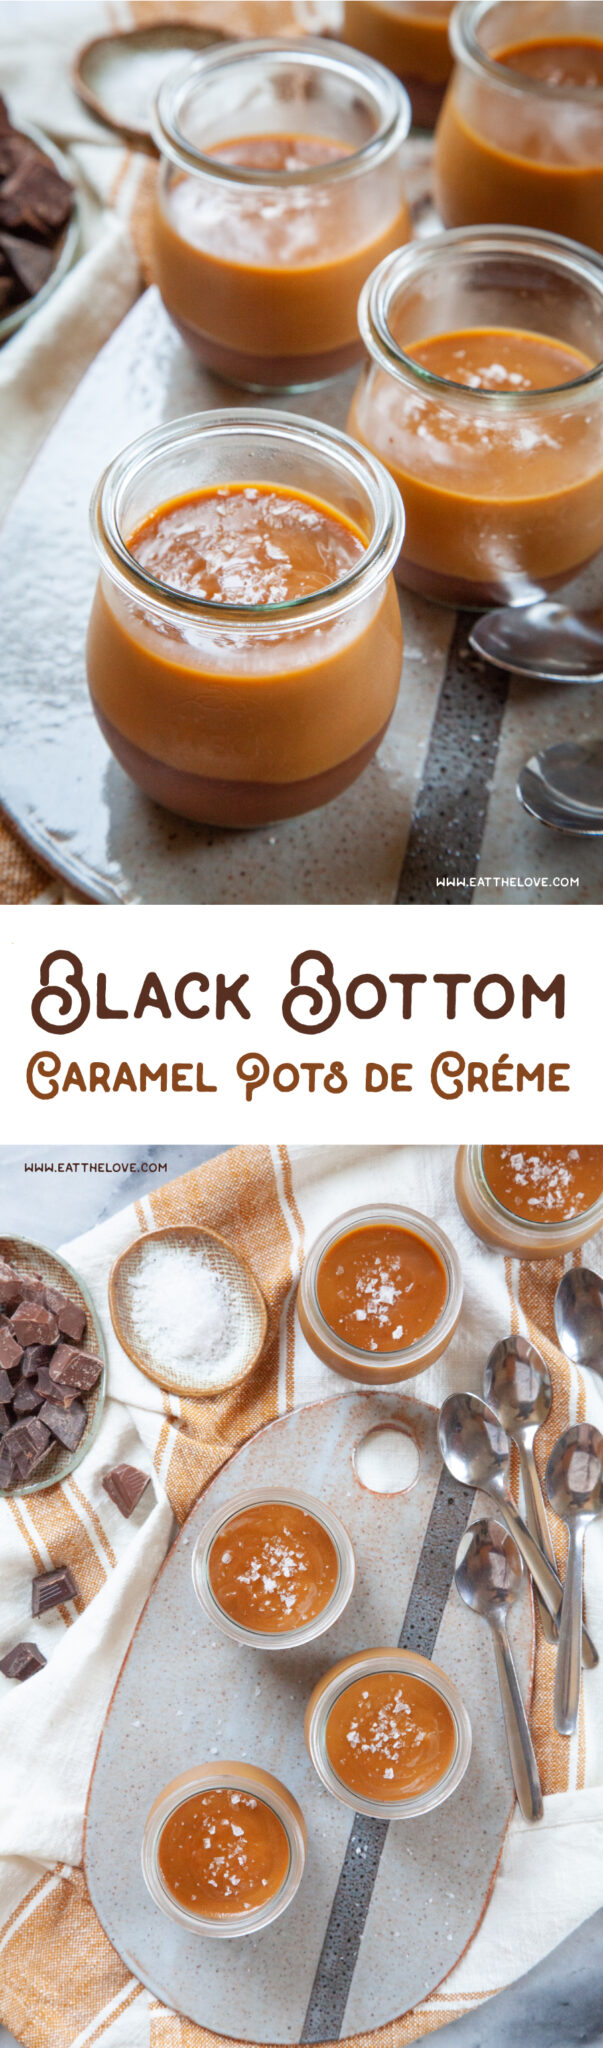 Top image is several black bottom caramel pots de creme on a ceramic cheese board. There is a small plate of chopped chocolate chunks behind them. Bottom image is several black bottom caramel pots de creme on a ceramic cheese board and on a cloth napkin. There are soon next to the pots de creme, along with small bowls with salt and chopped chocolate in them.